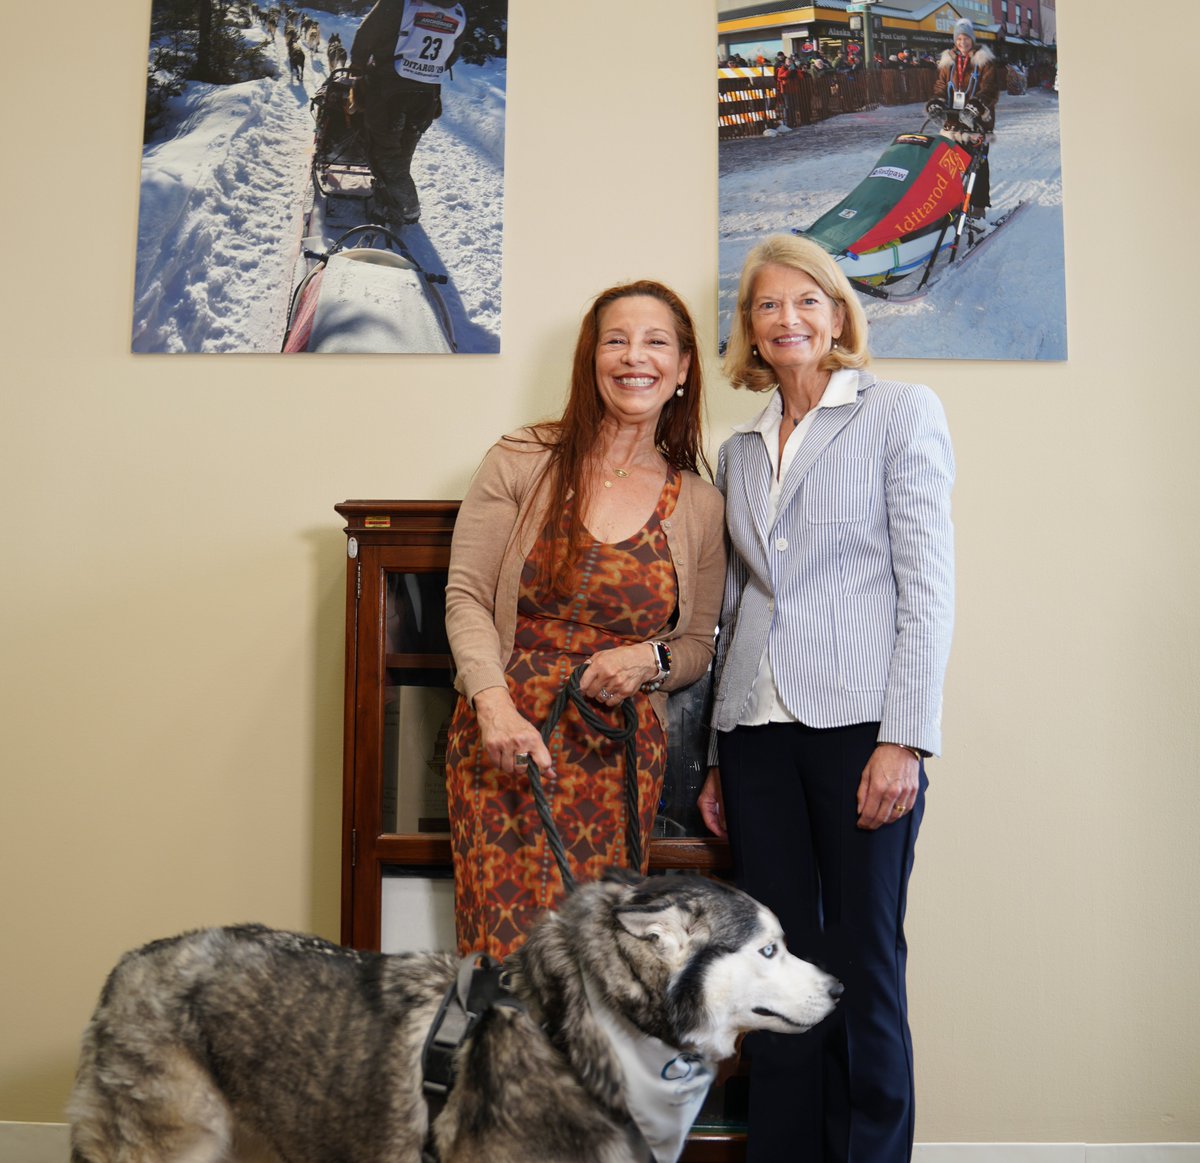 Togo the Siberian Husky was on the Hill with @takechargereg to advocate for canine and comparative oncology research. It was great to spend time with Togo and his owners to talk about the importance of healthy dogs.